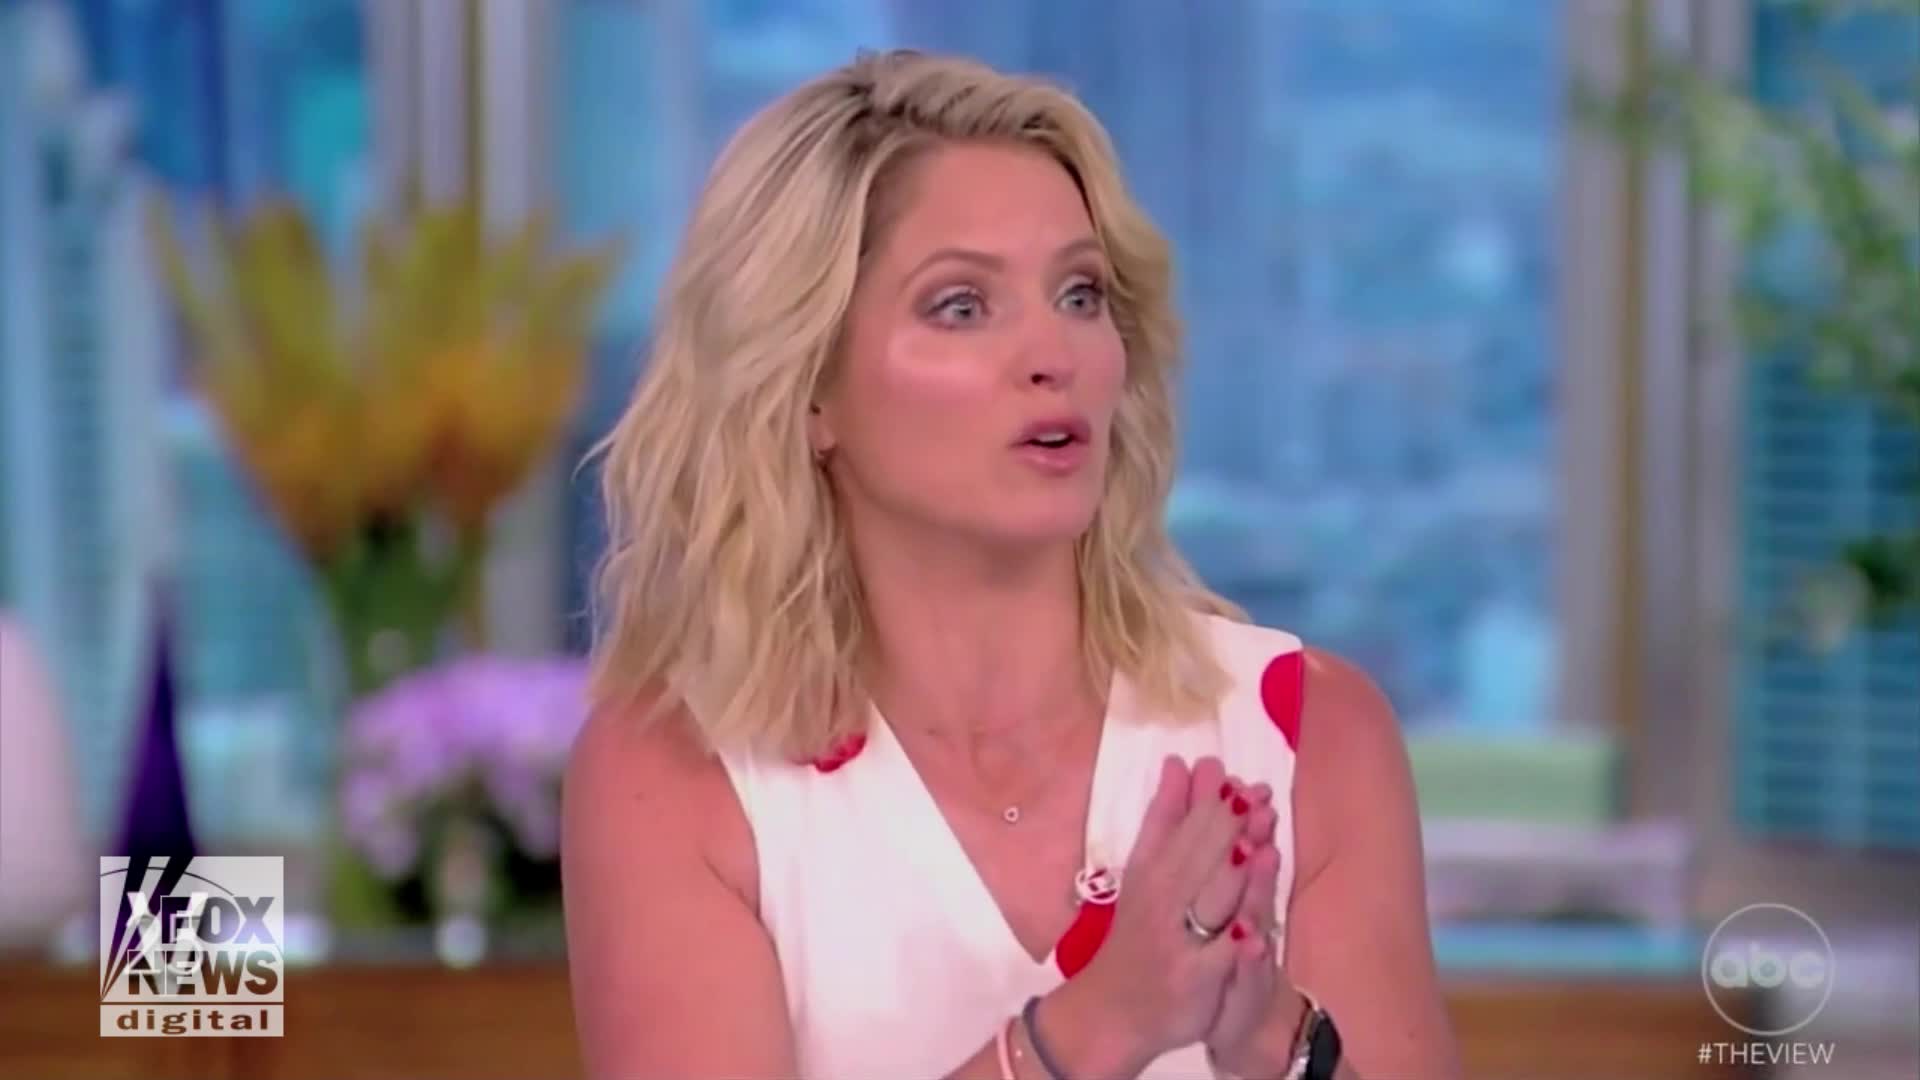 'The View' host suggests Saudis would run to Iran if they felt abandoned by US